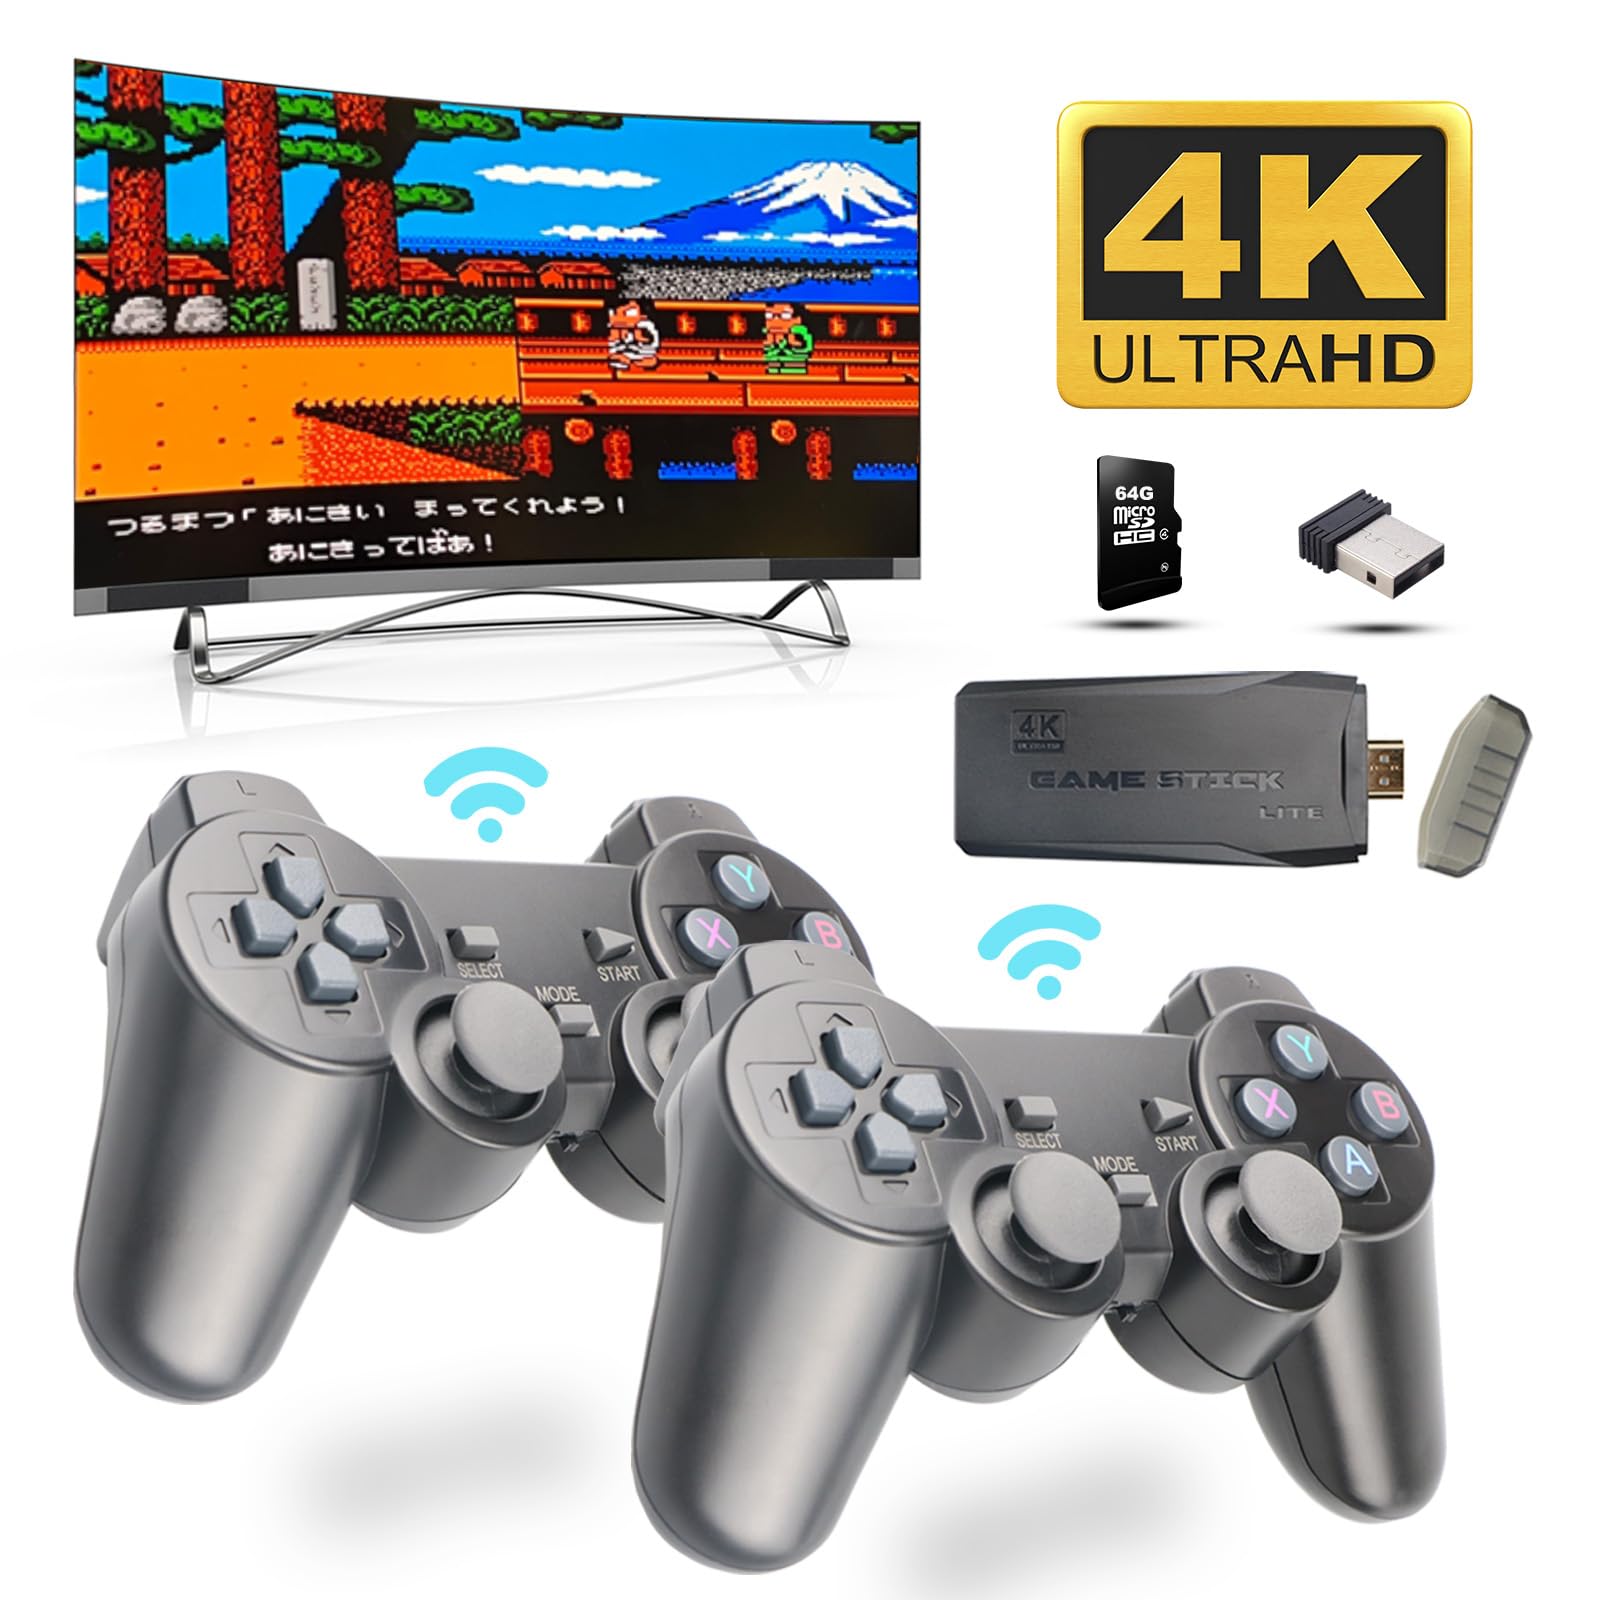 Heramie Wireless Retro Game Console, Plug and Play Video Games 4K HDMI Output for TV, Classic Game Stick, Built in 10000+ Games with 9 Emulators and 2 Wireless Controller 2.4G Gift for Kids & Adults